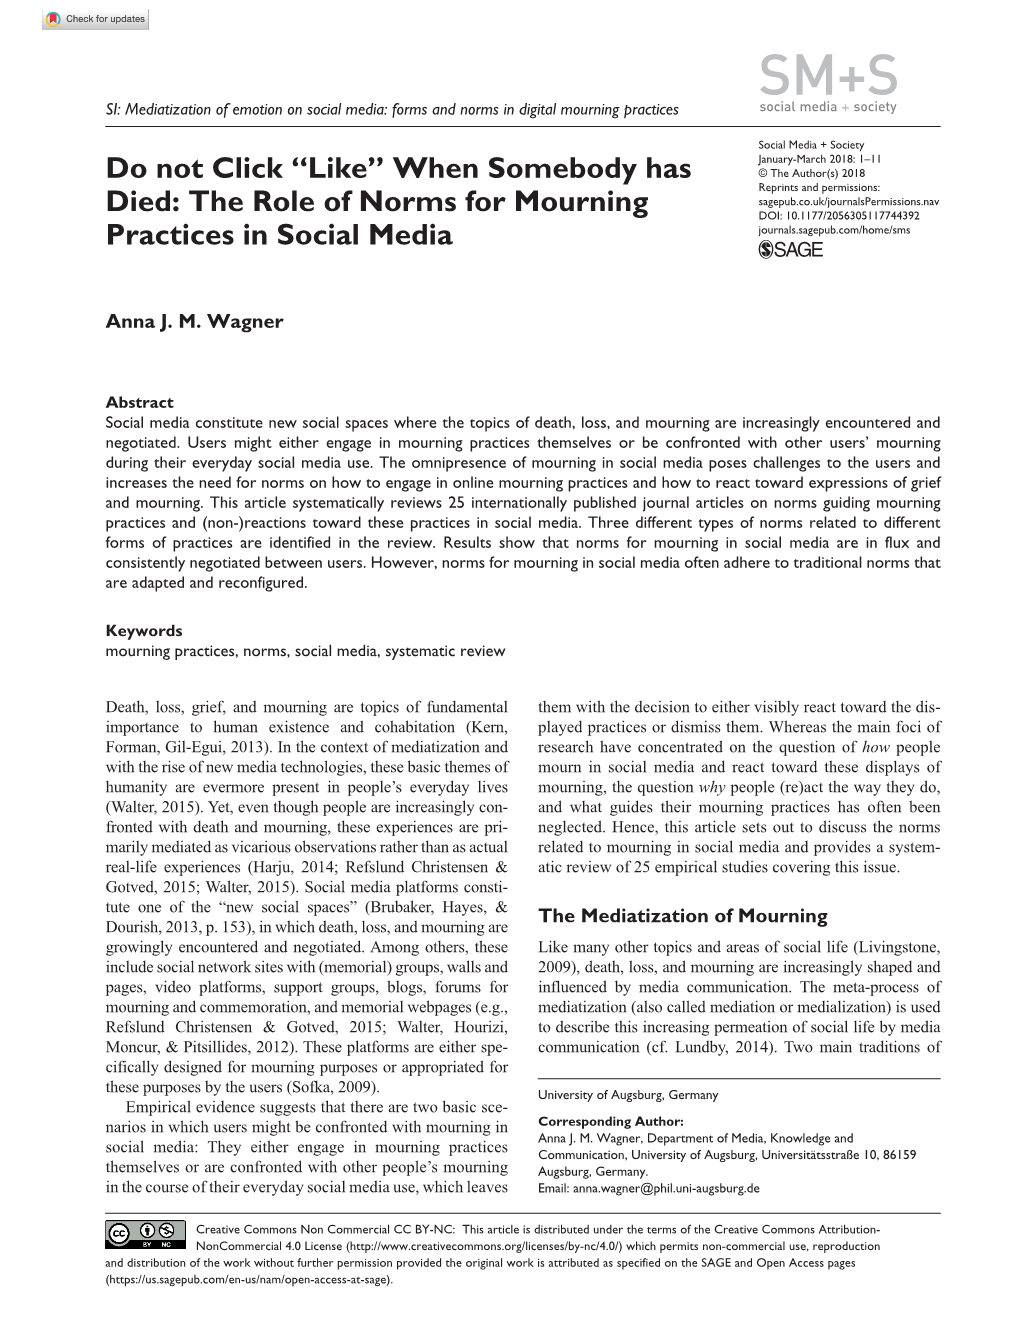 The Role of Norms for Mourning Practices in Social Media